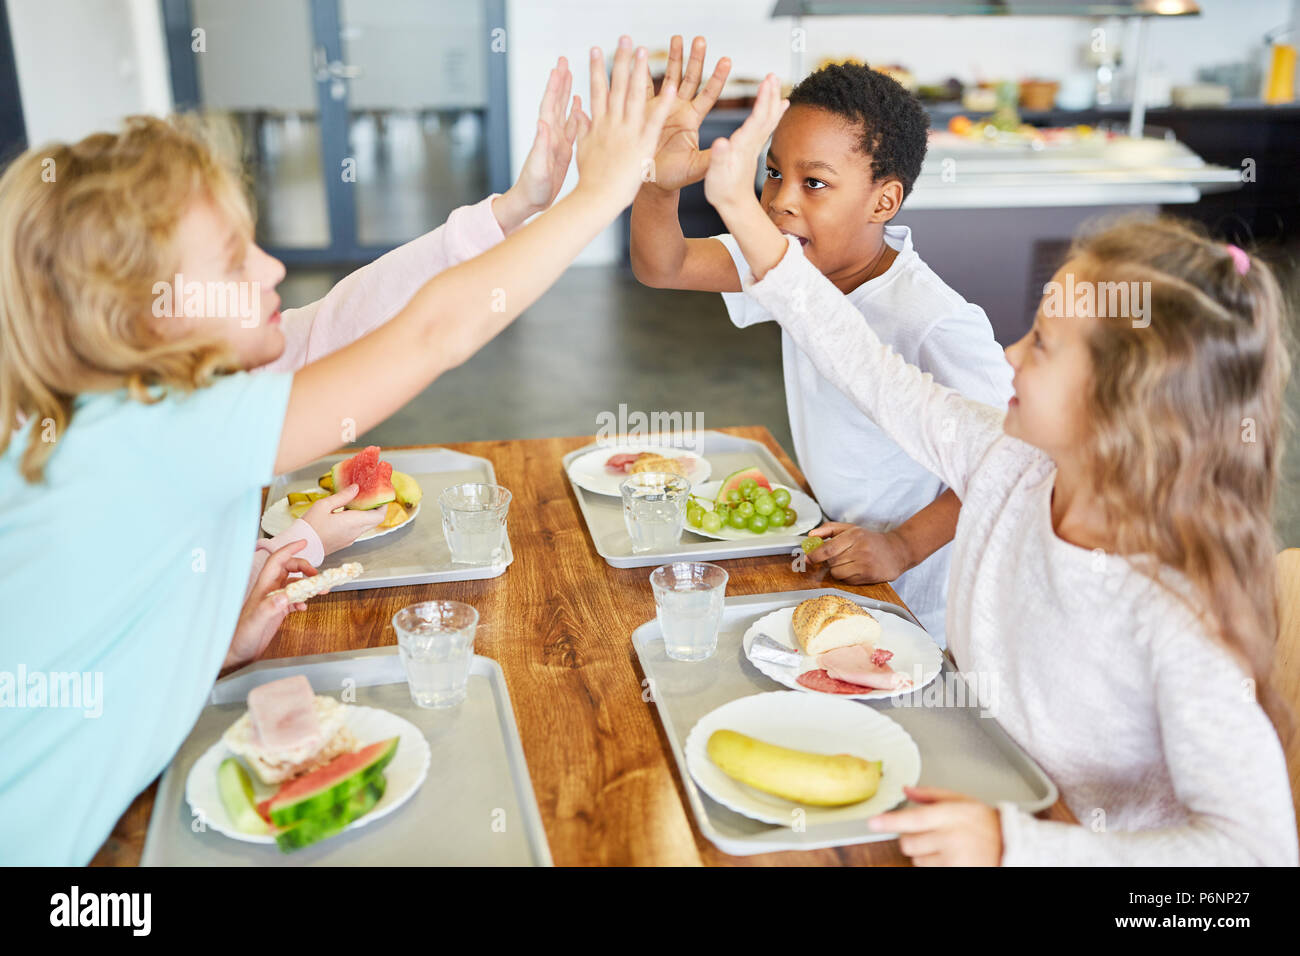 Children as friends have fun in the school canteen at lunch Stock Photo